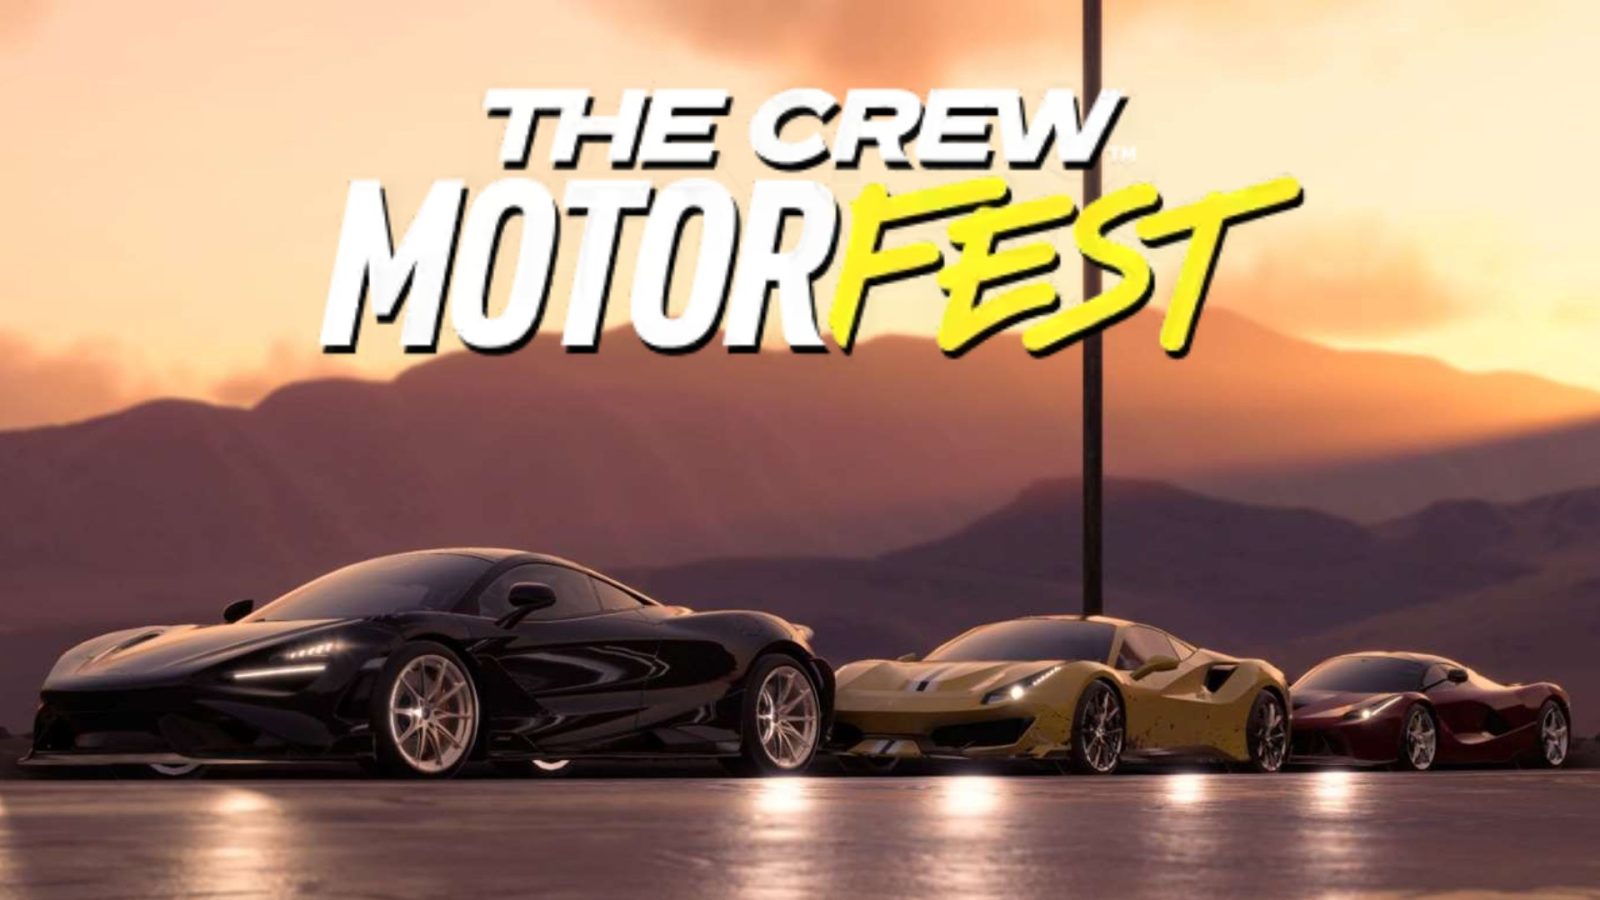 Play The Crew Motorfest 3 Days Early or Free For 5 Hours